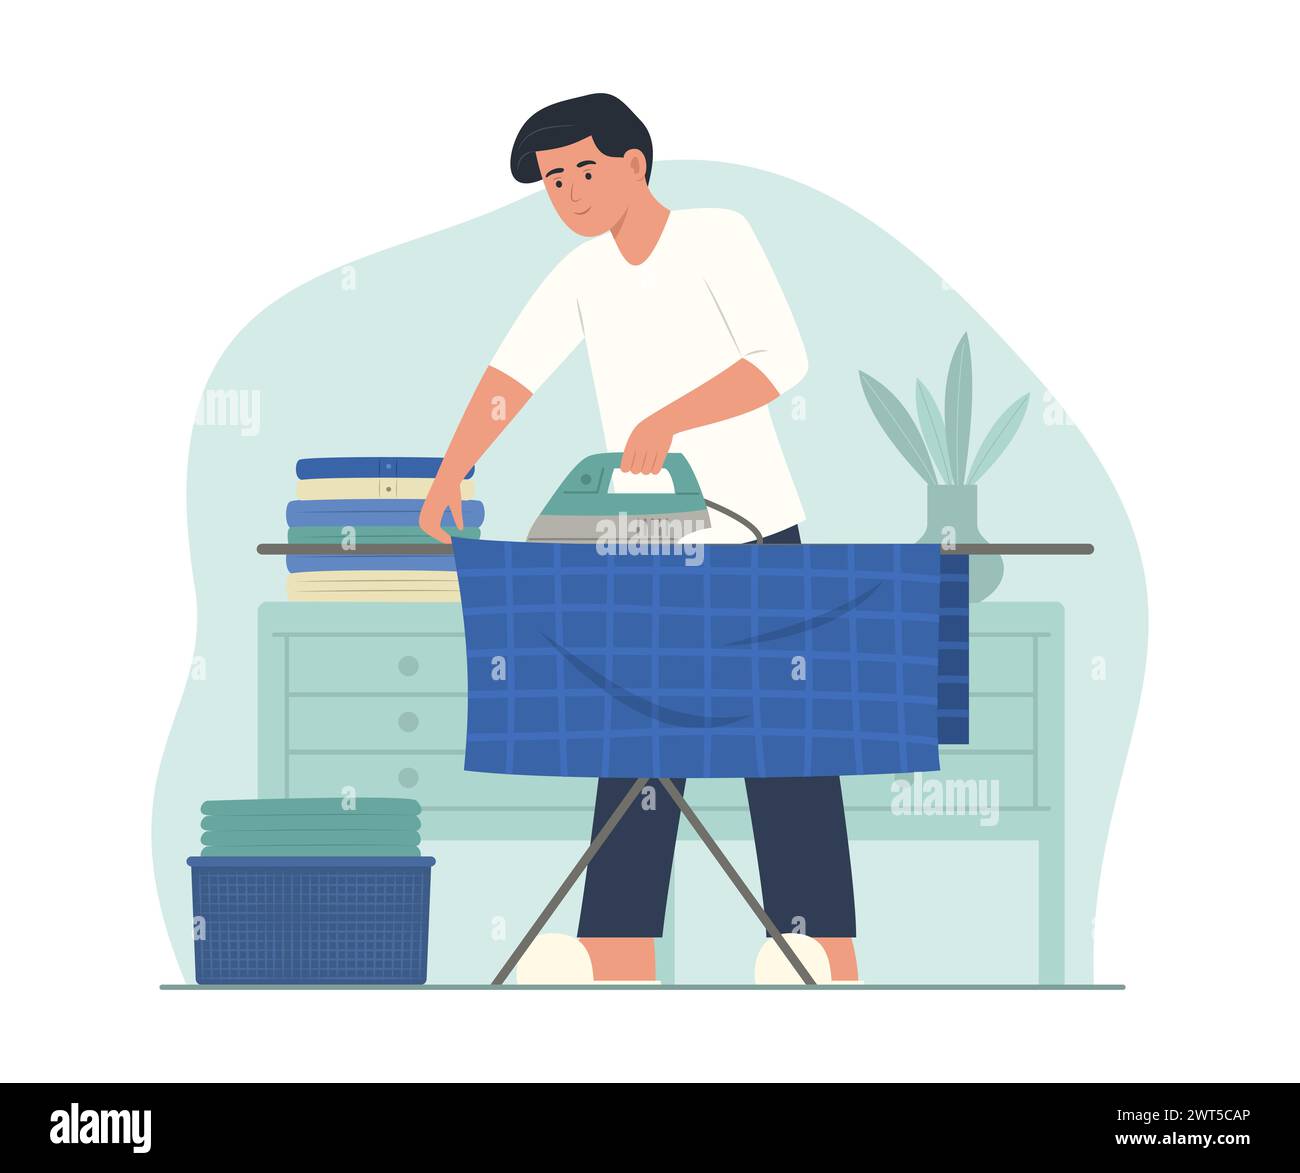 Man Ironing Clothes with Electric Iron at Home for Housework Concept Illustration Stock Vector